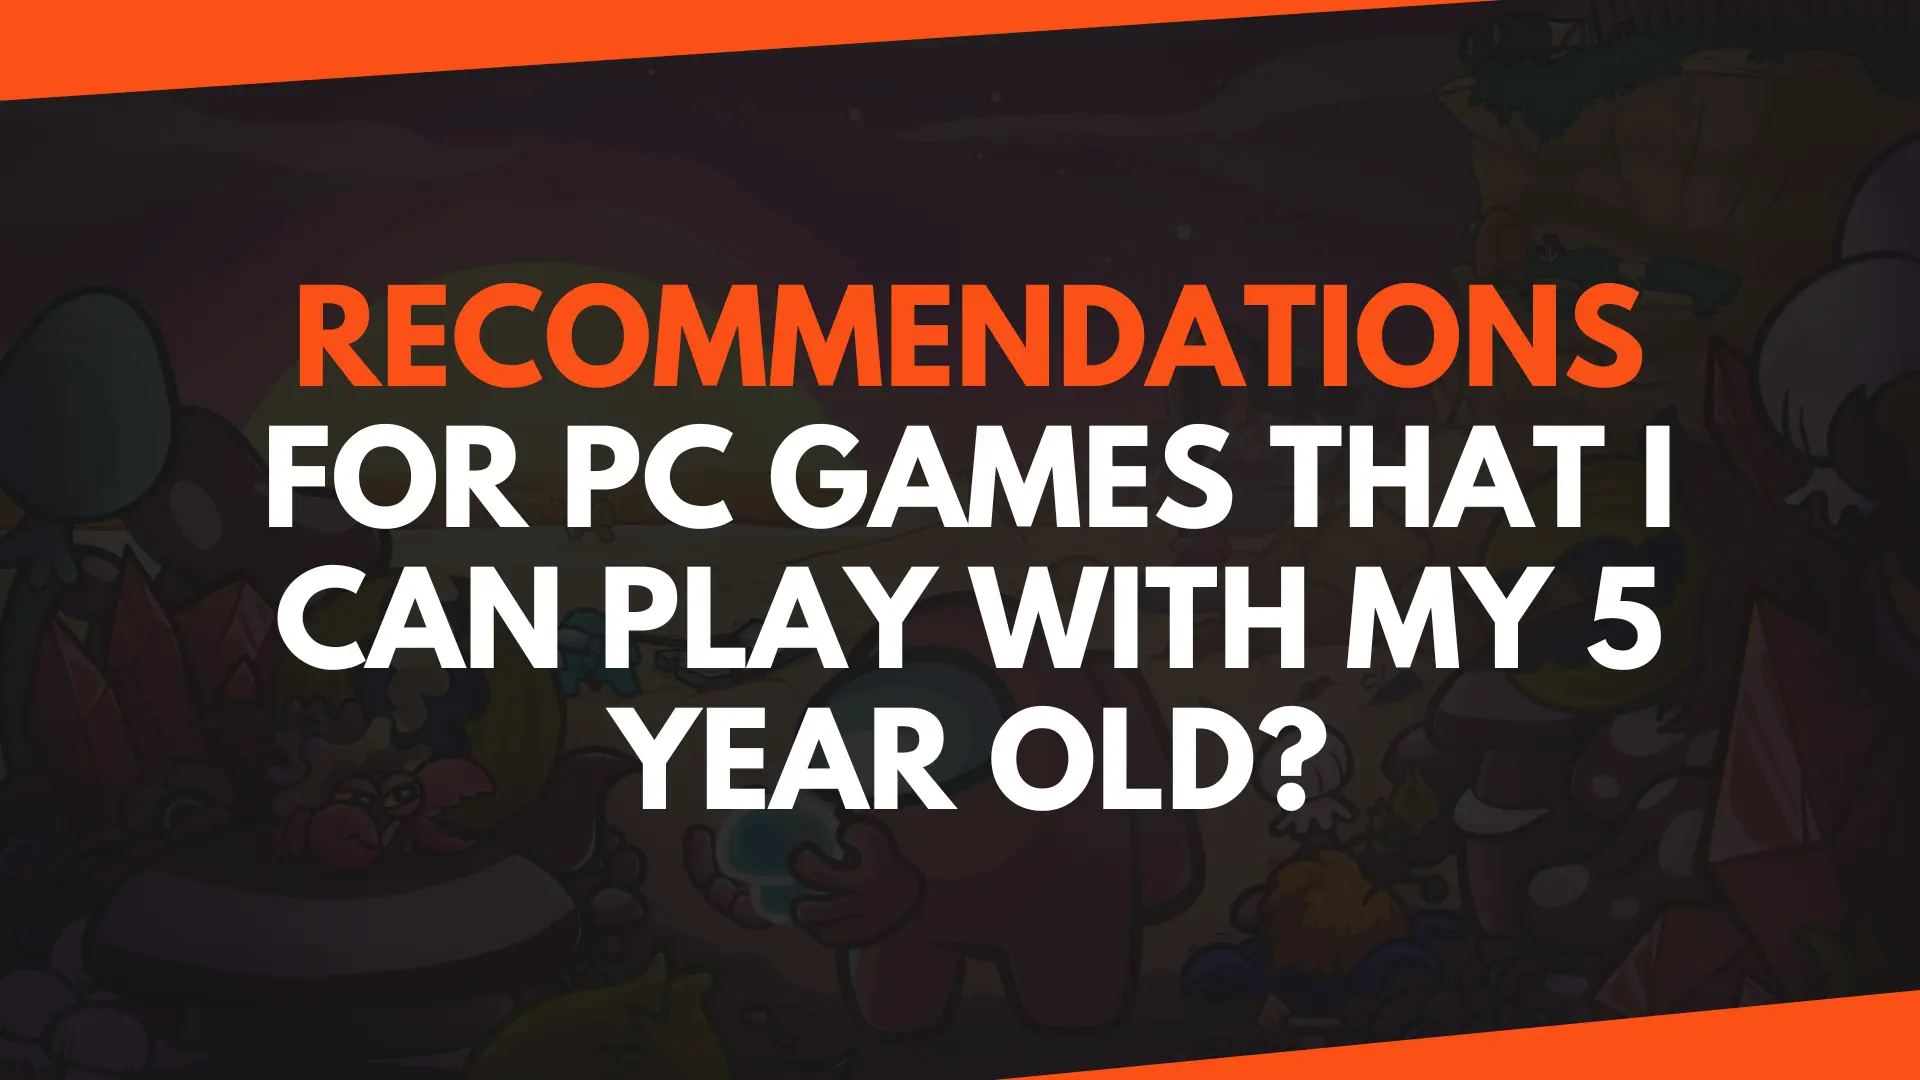 Recommendations For PC Games That I Can Play With My 5 Year Old?